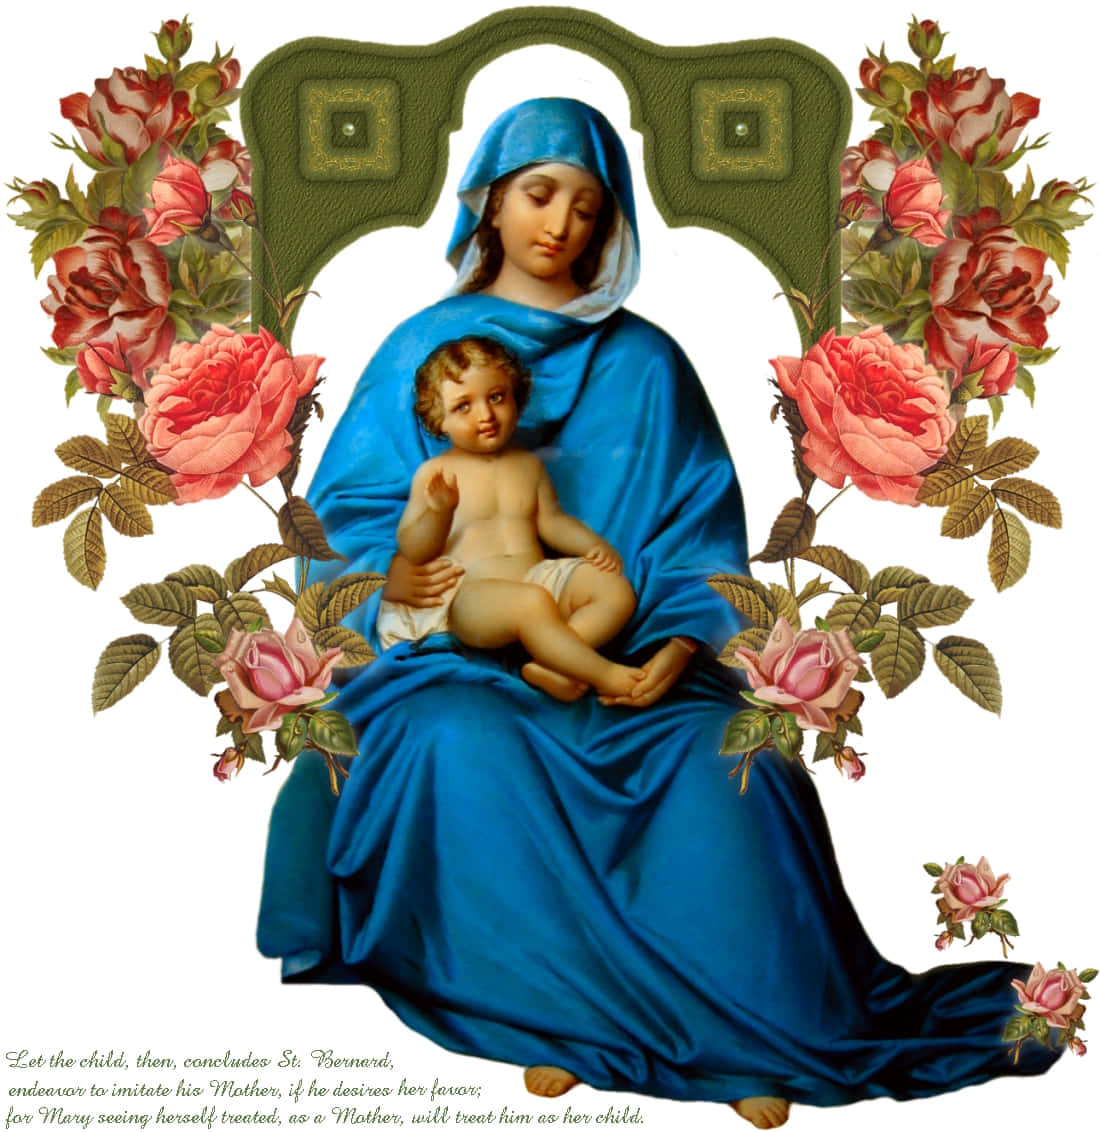 Mother Mary, the inspirational figure guiding faith and devotion